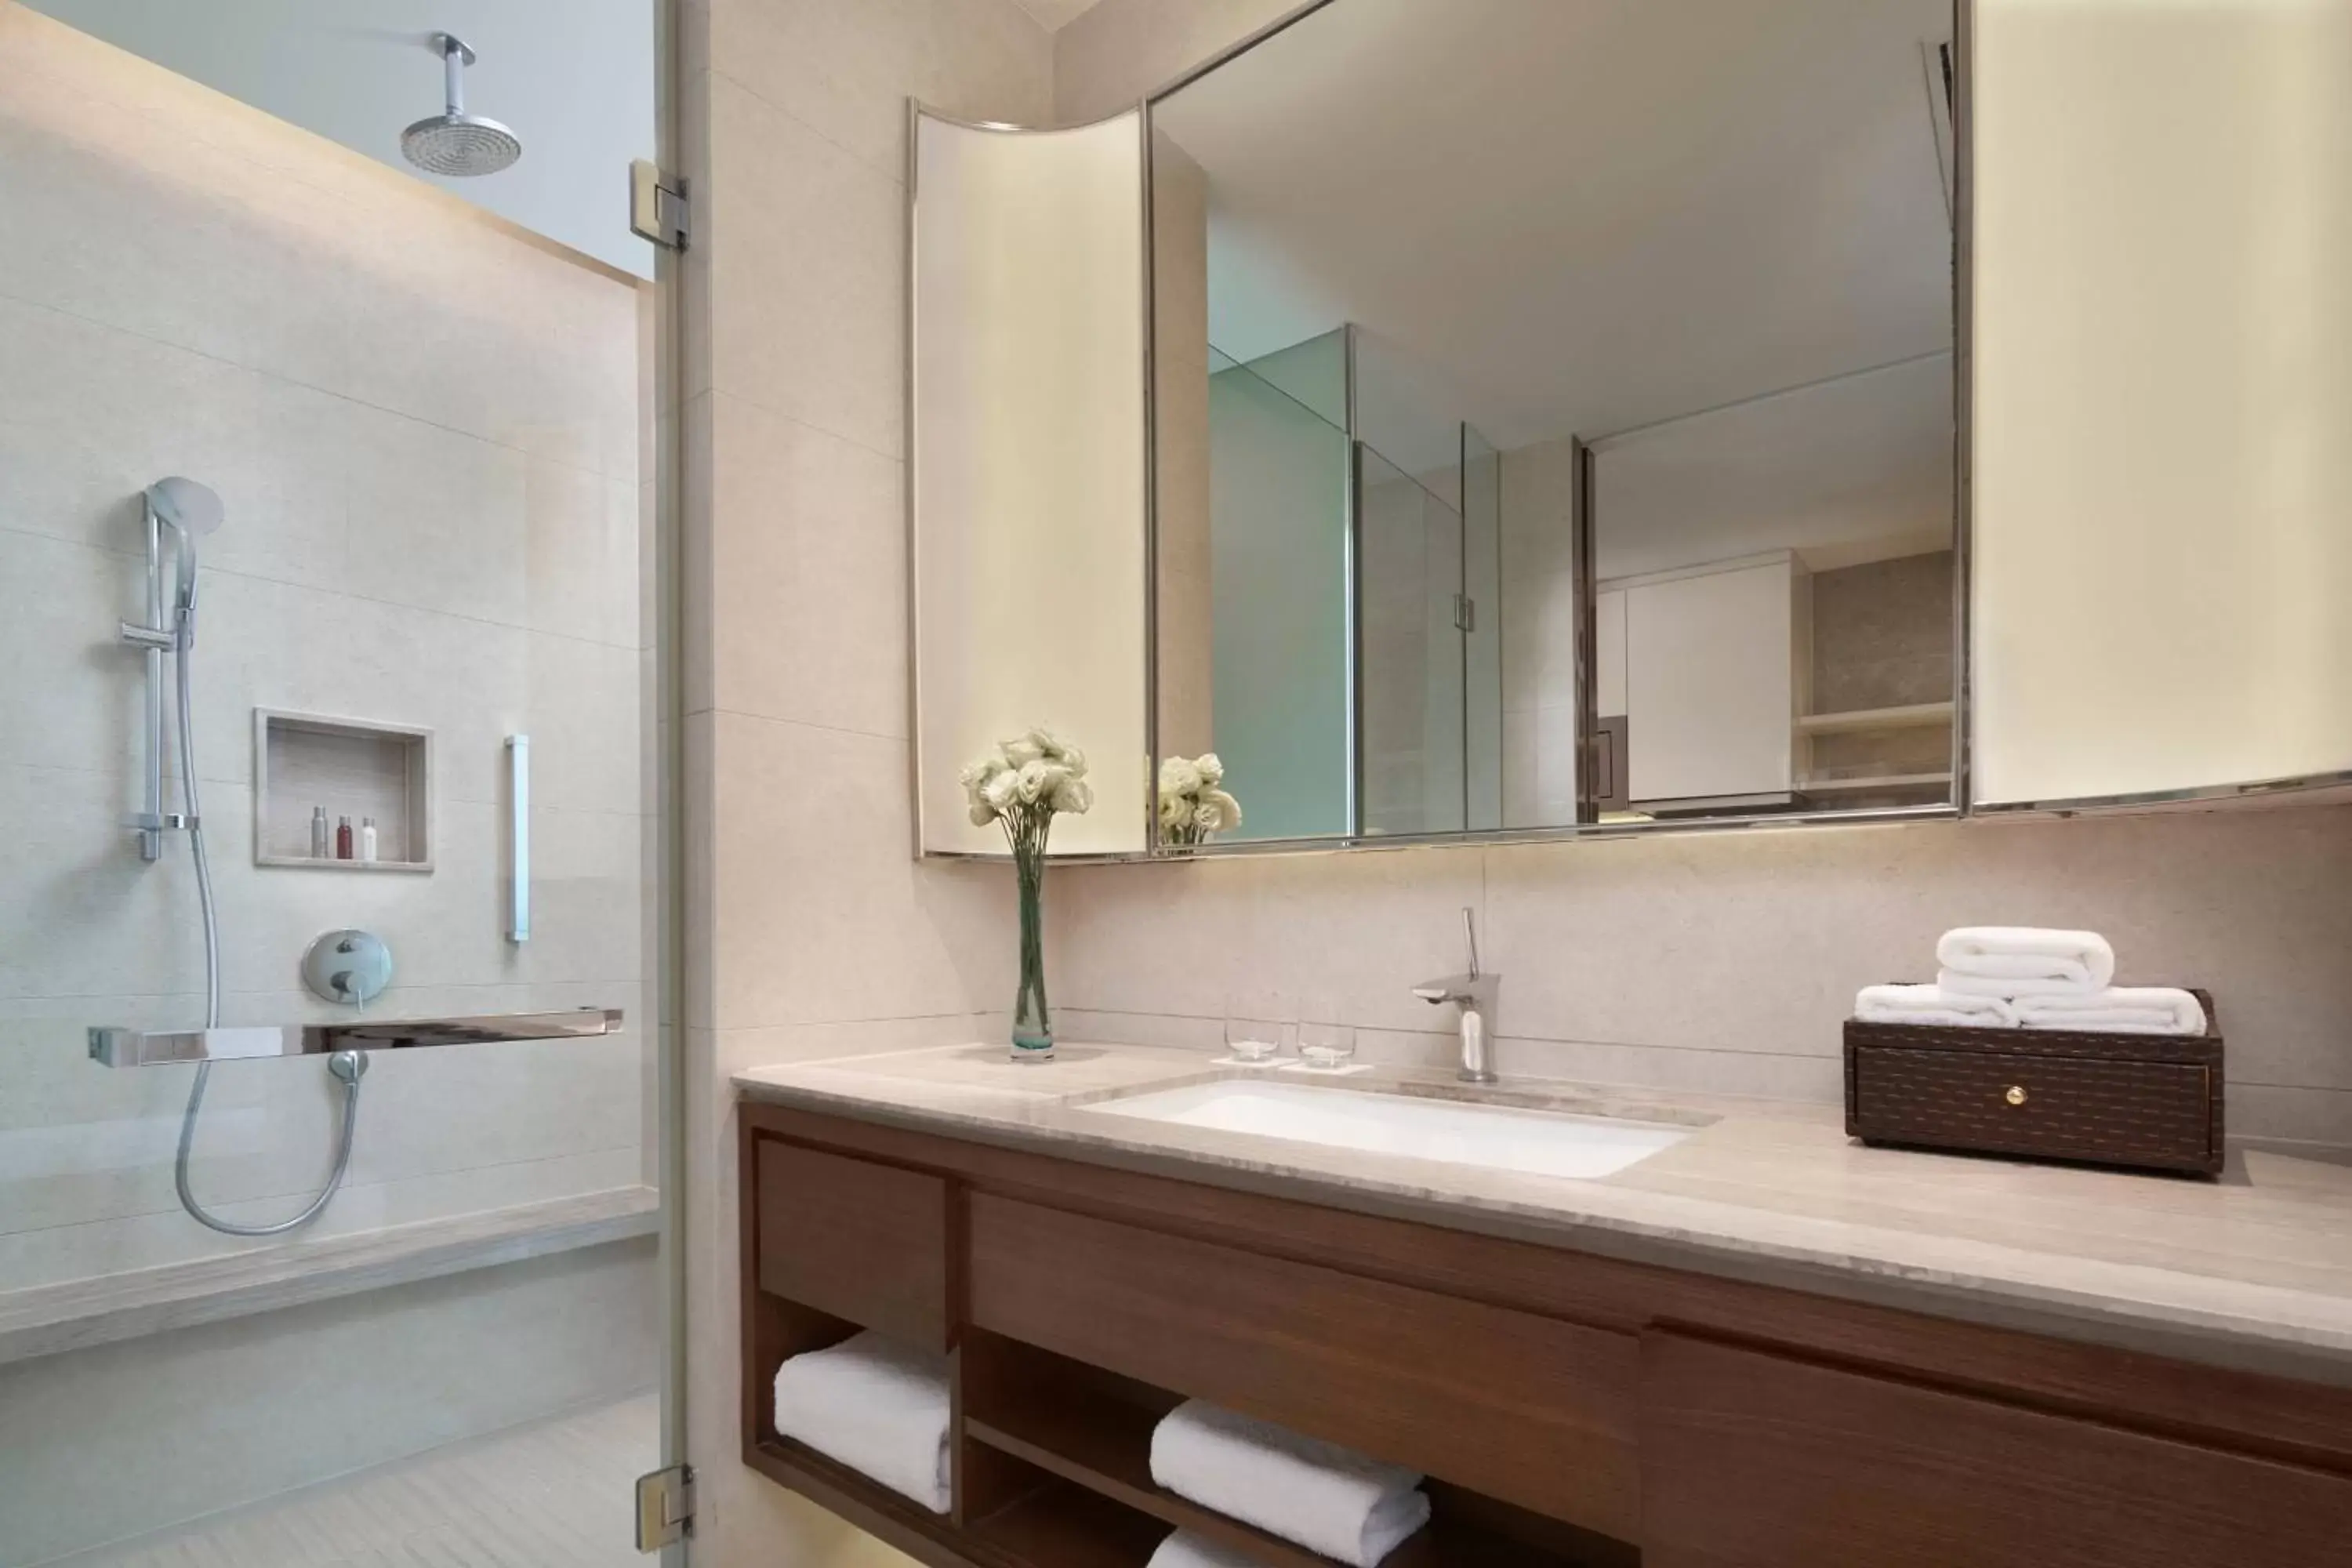 Bathroom in The OCT Harbour, Shenzhen - Marriott Executive Apartments